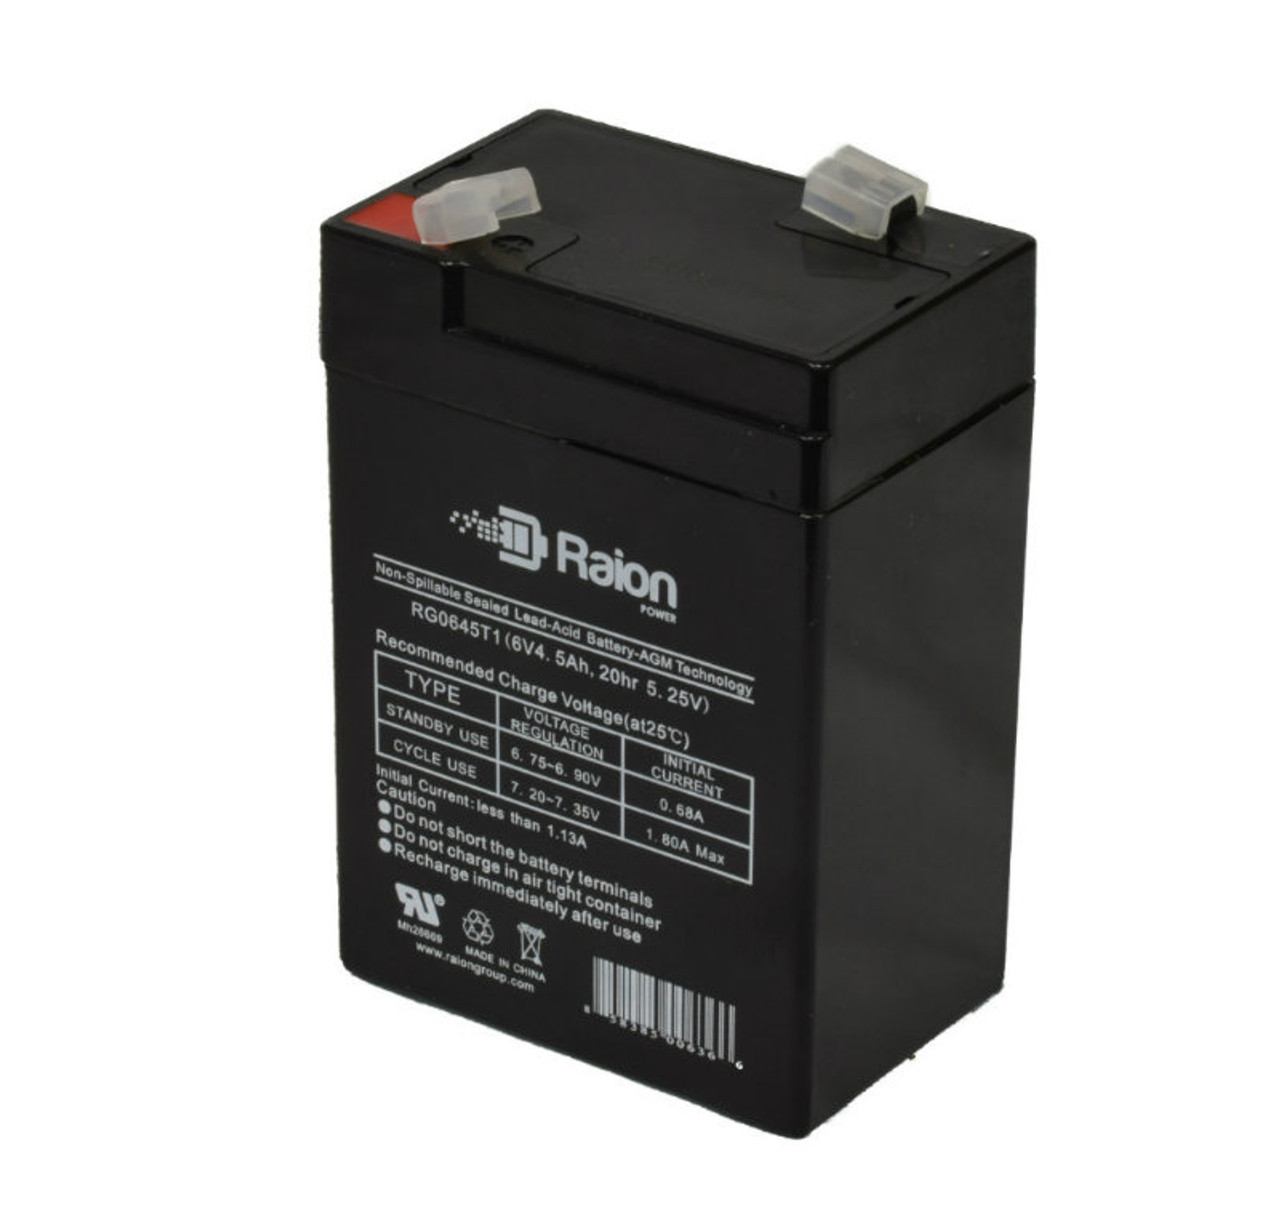 Raion Power RG0645T1 6V 4.5Ah Replacement Battery Cartridge for Power Energy GB6-4